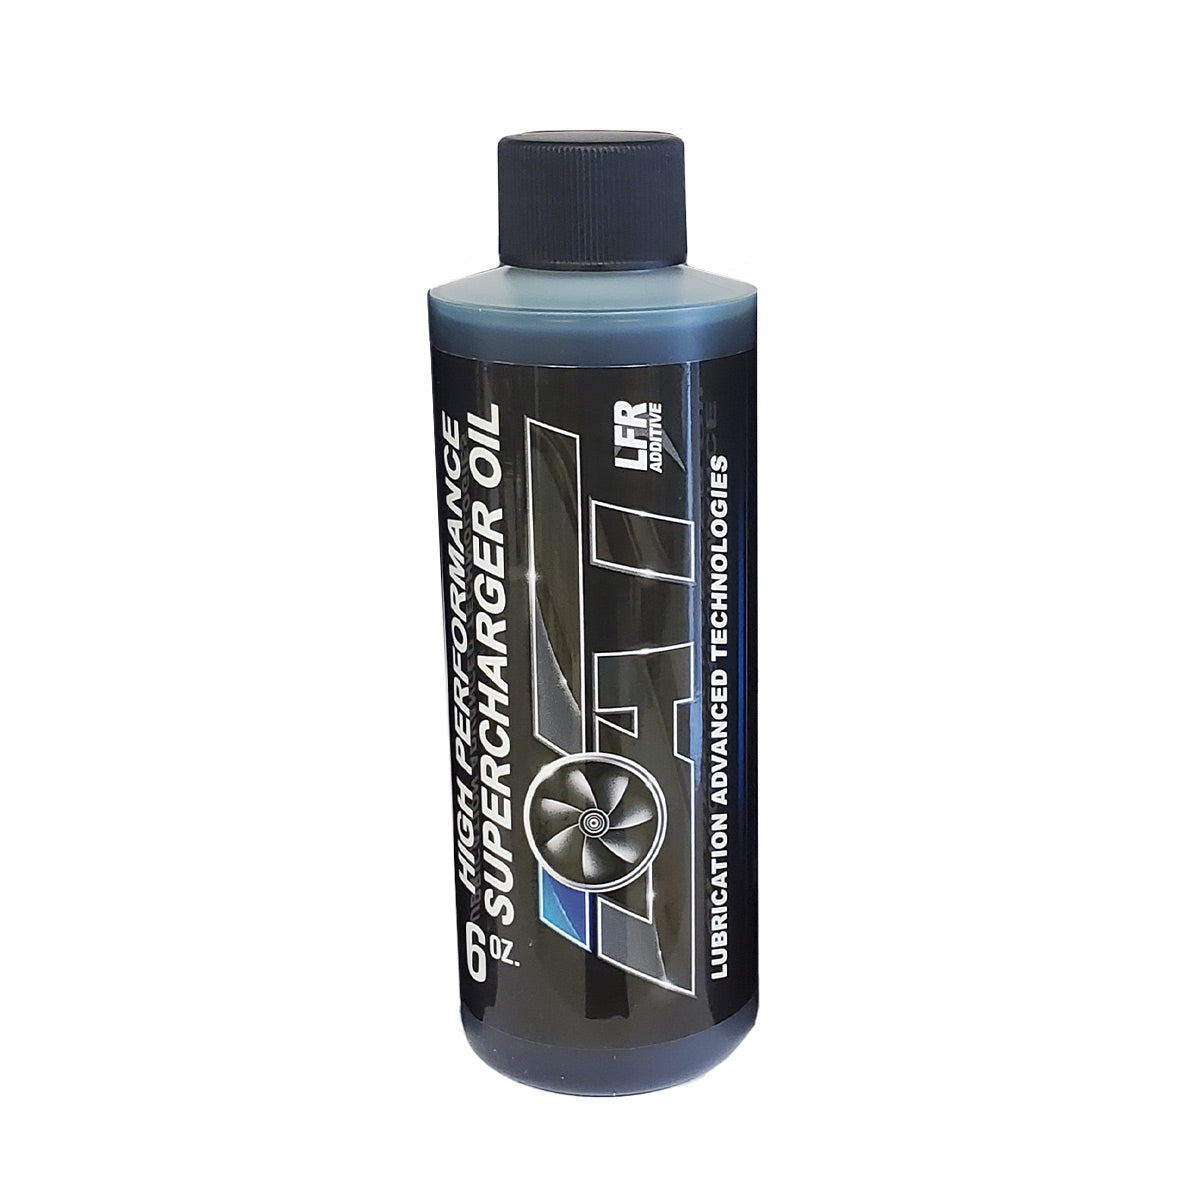 LAT CENTRIFUGAL SUPERCHARGER OIL - 6OZ